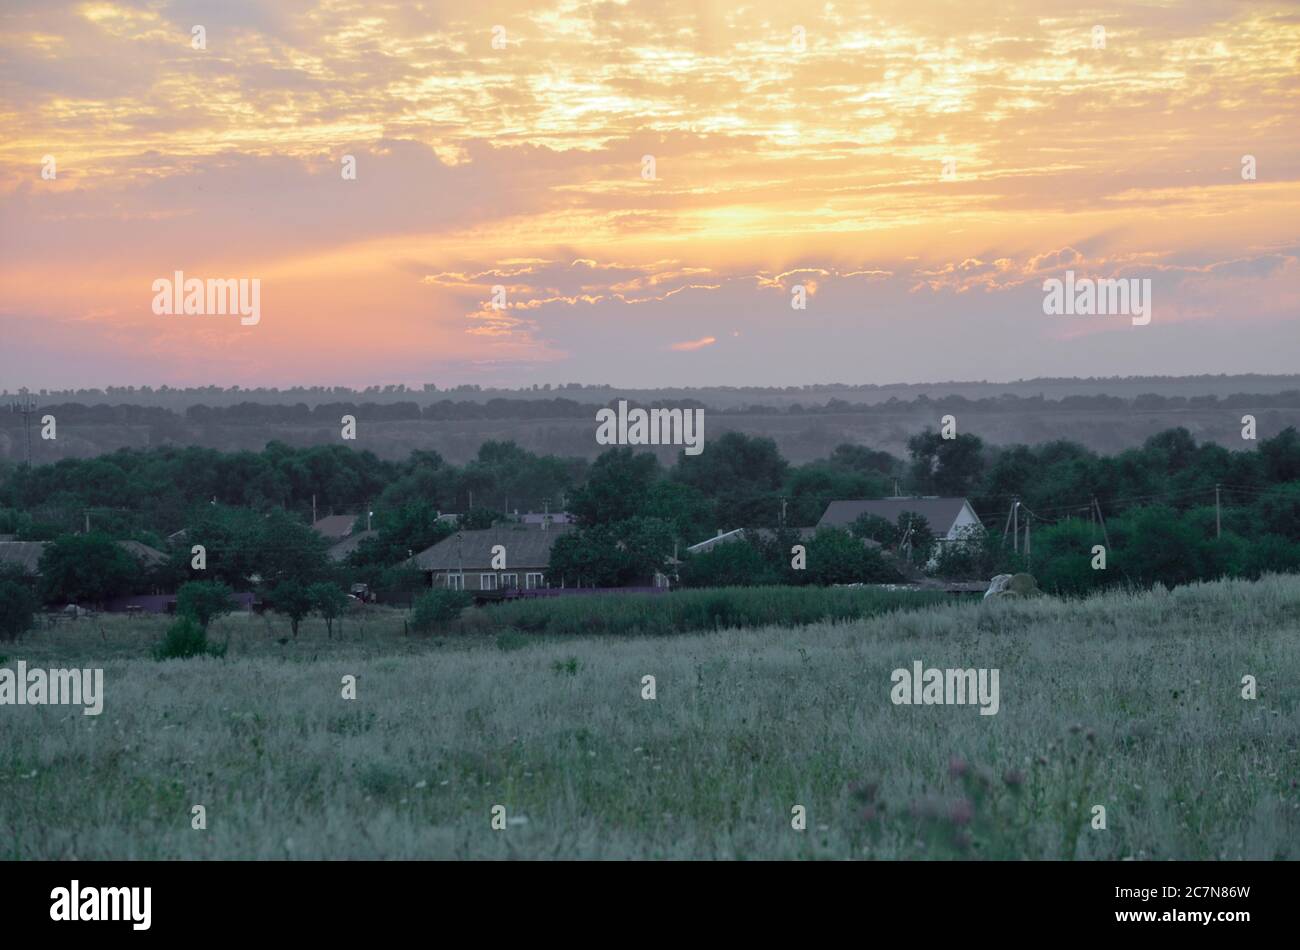 The rural landscape in summer is in the rays of the sunset and illuminated by cloudy skies. Stock Photo